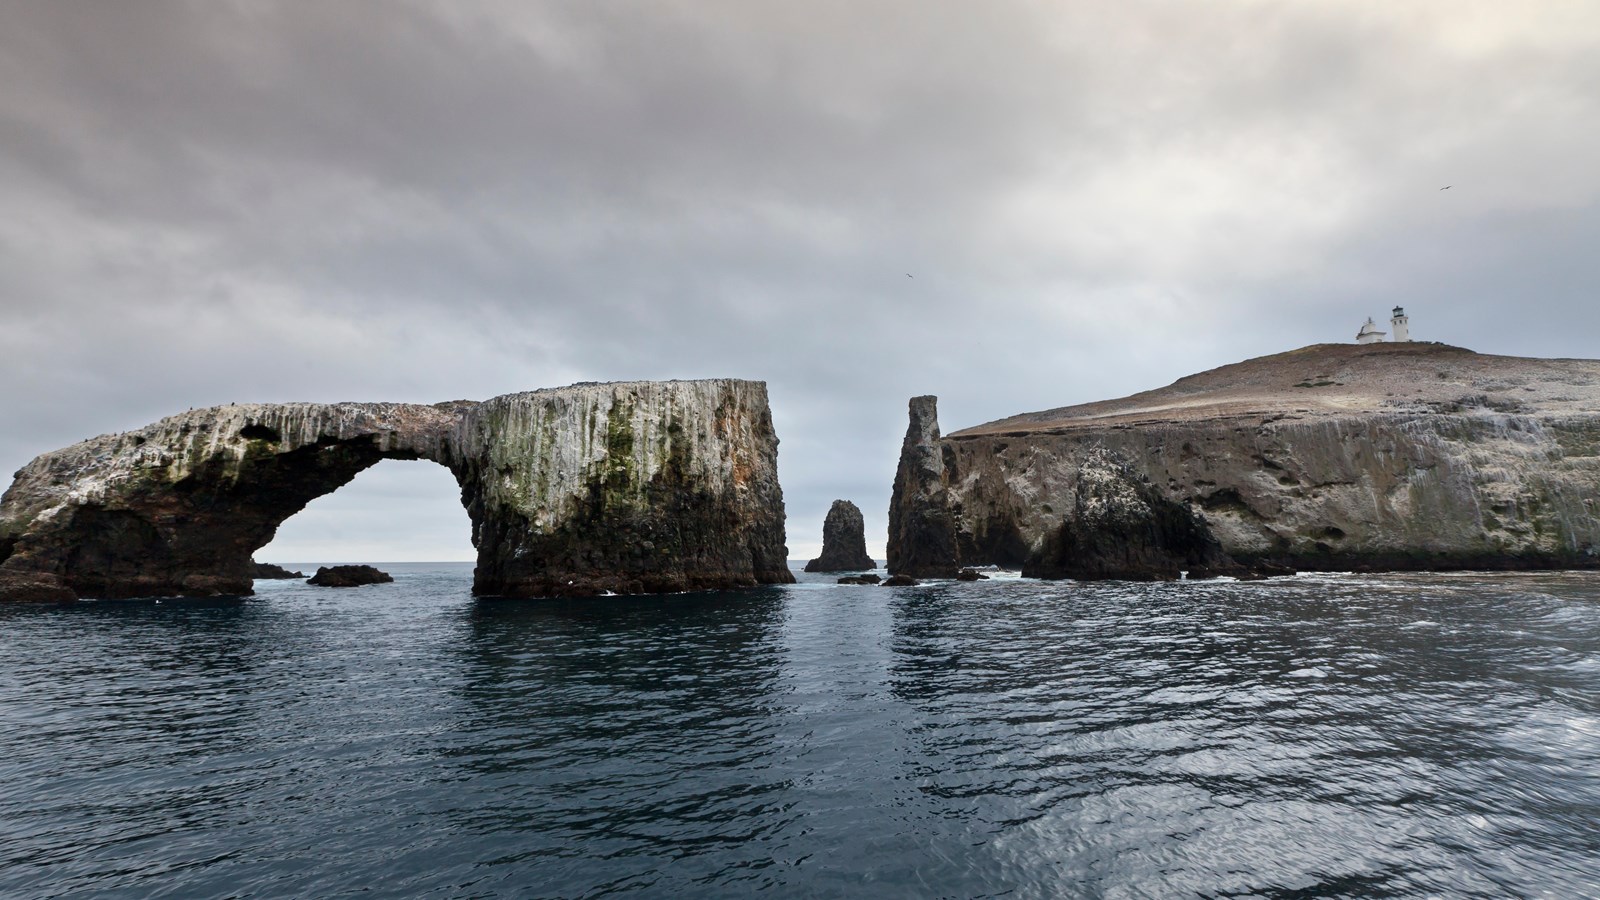 Steep dark volcanic rock has been eroded into a 40-foot-high arch that is surrounded by water. Behin